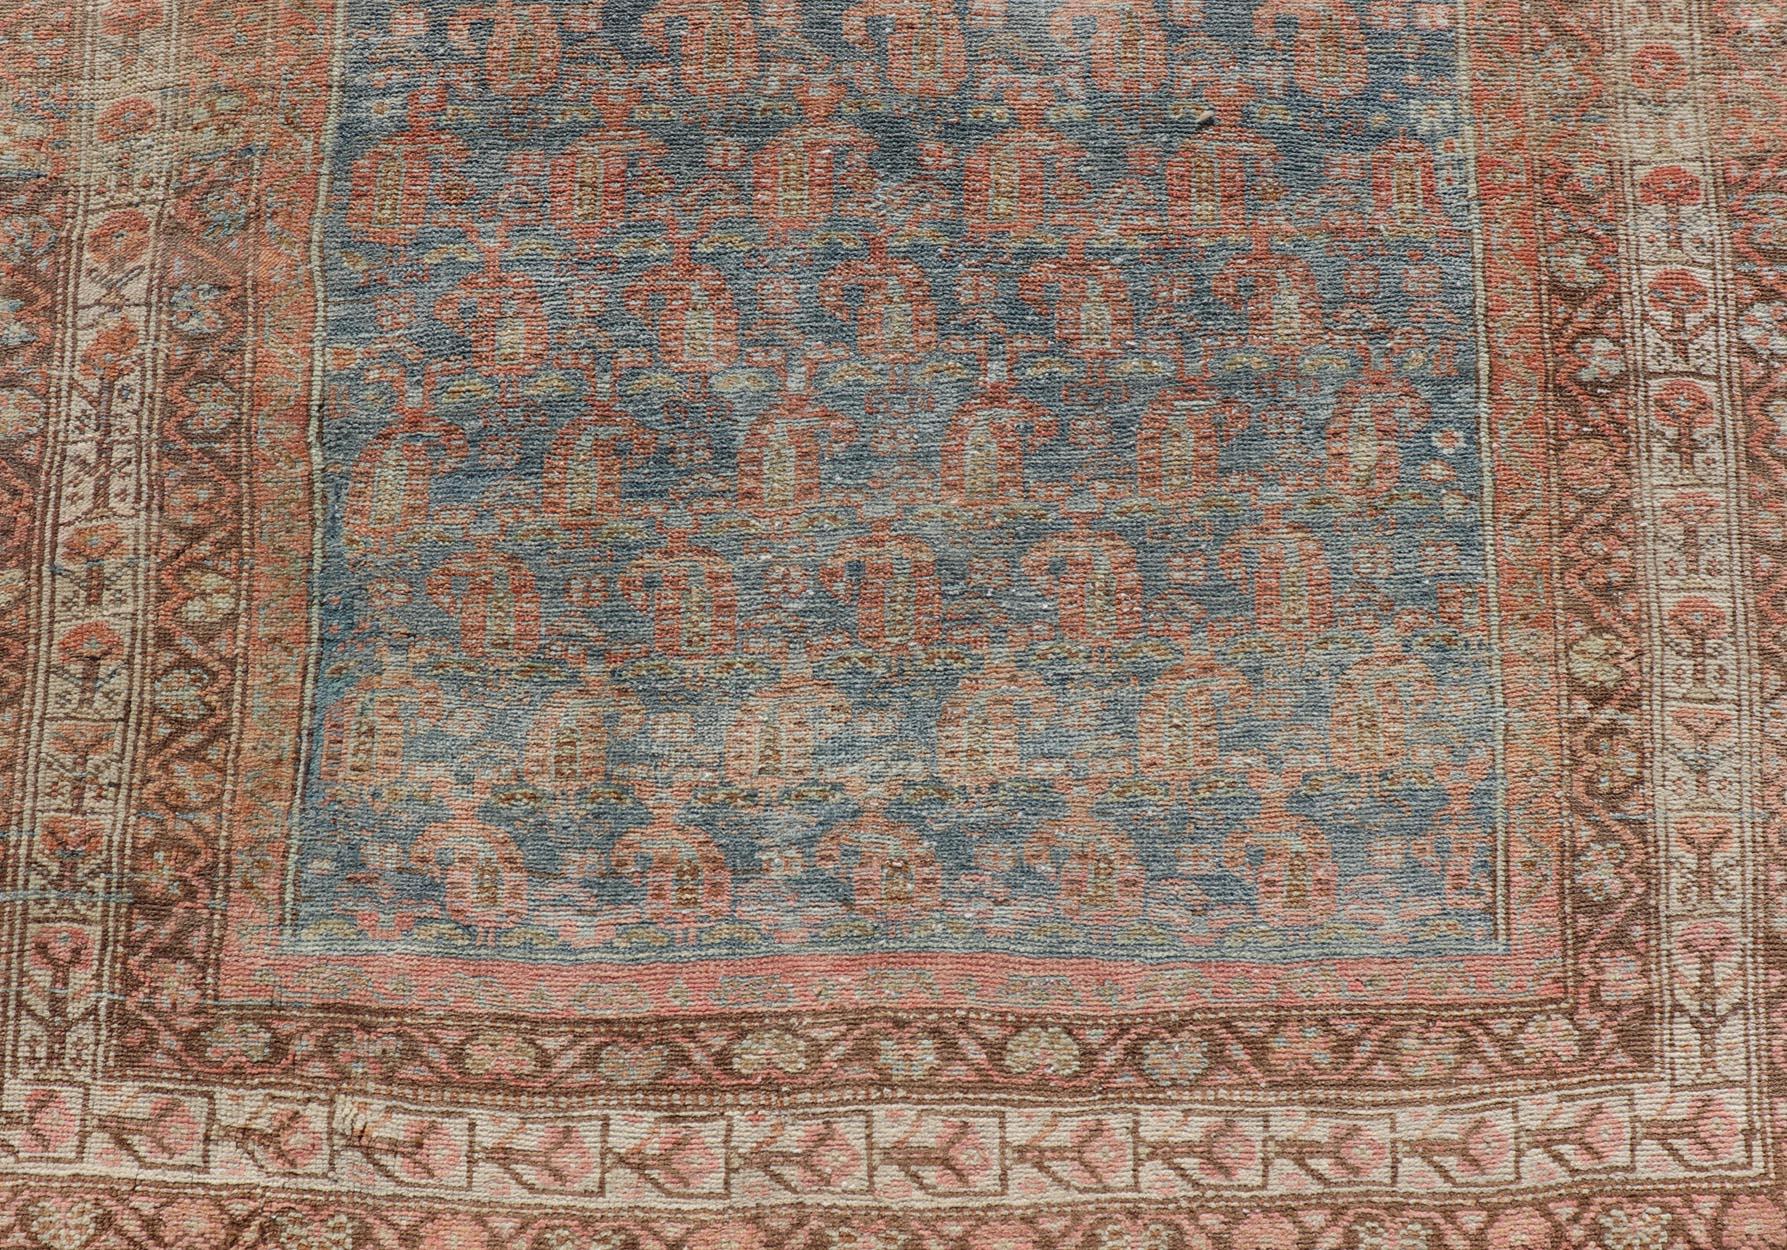 Antique Distressed Persian Mahal gallery runner in wool with all-over design. distressed Persia rug. Keivan Woven Arts/ rug/ ZIR-54-KV-01, country of origin / type: Iran / Mahal, circa 1910.

Measures: 3'8 x 9'7 

This antique distressed Persian